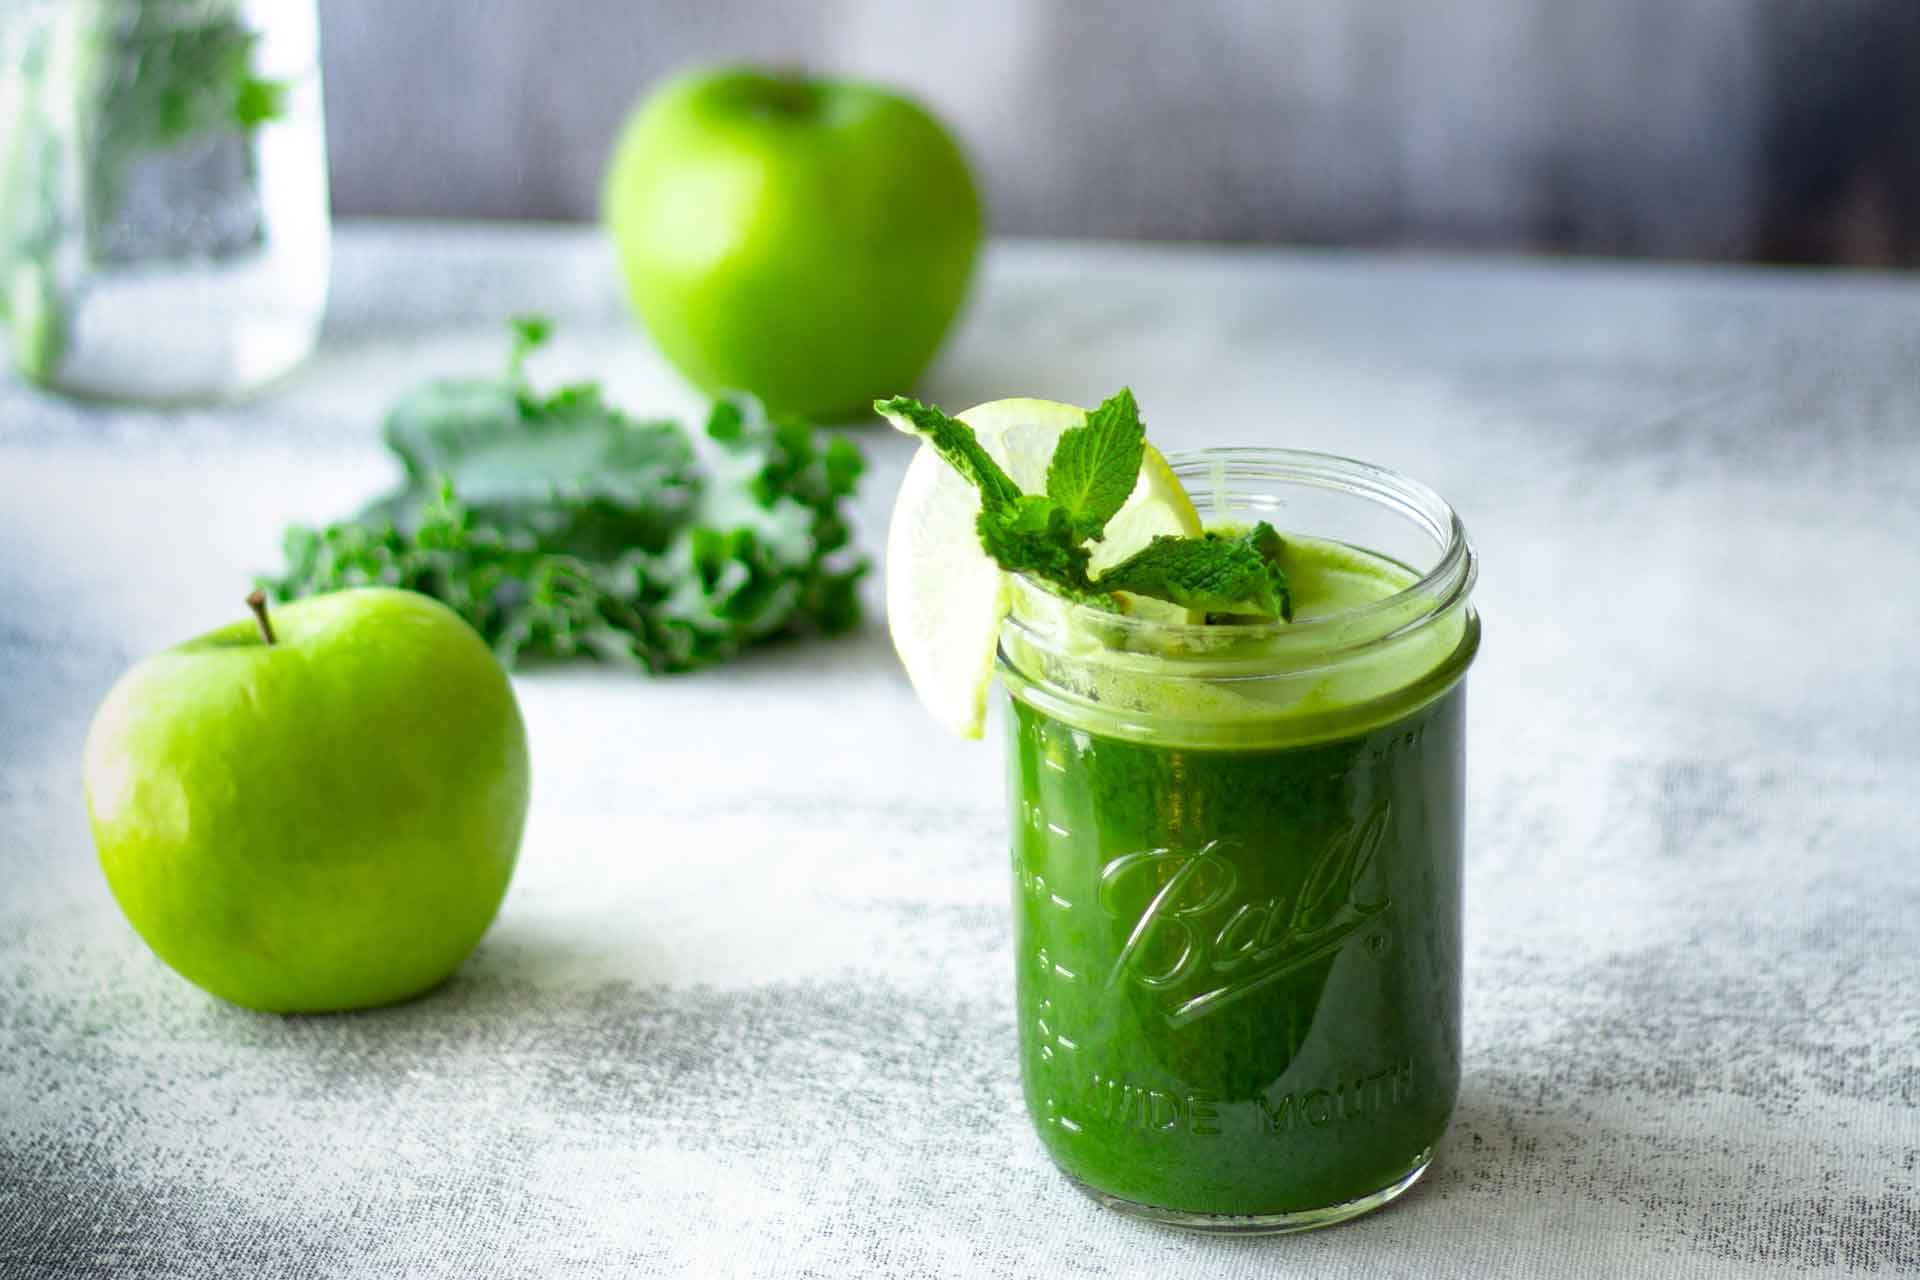 Mason jar of green juice with green apples and kale in the background.